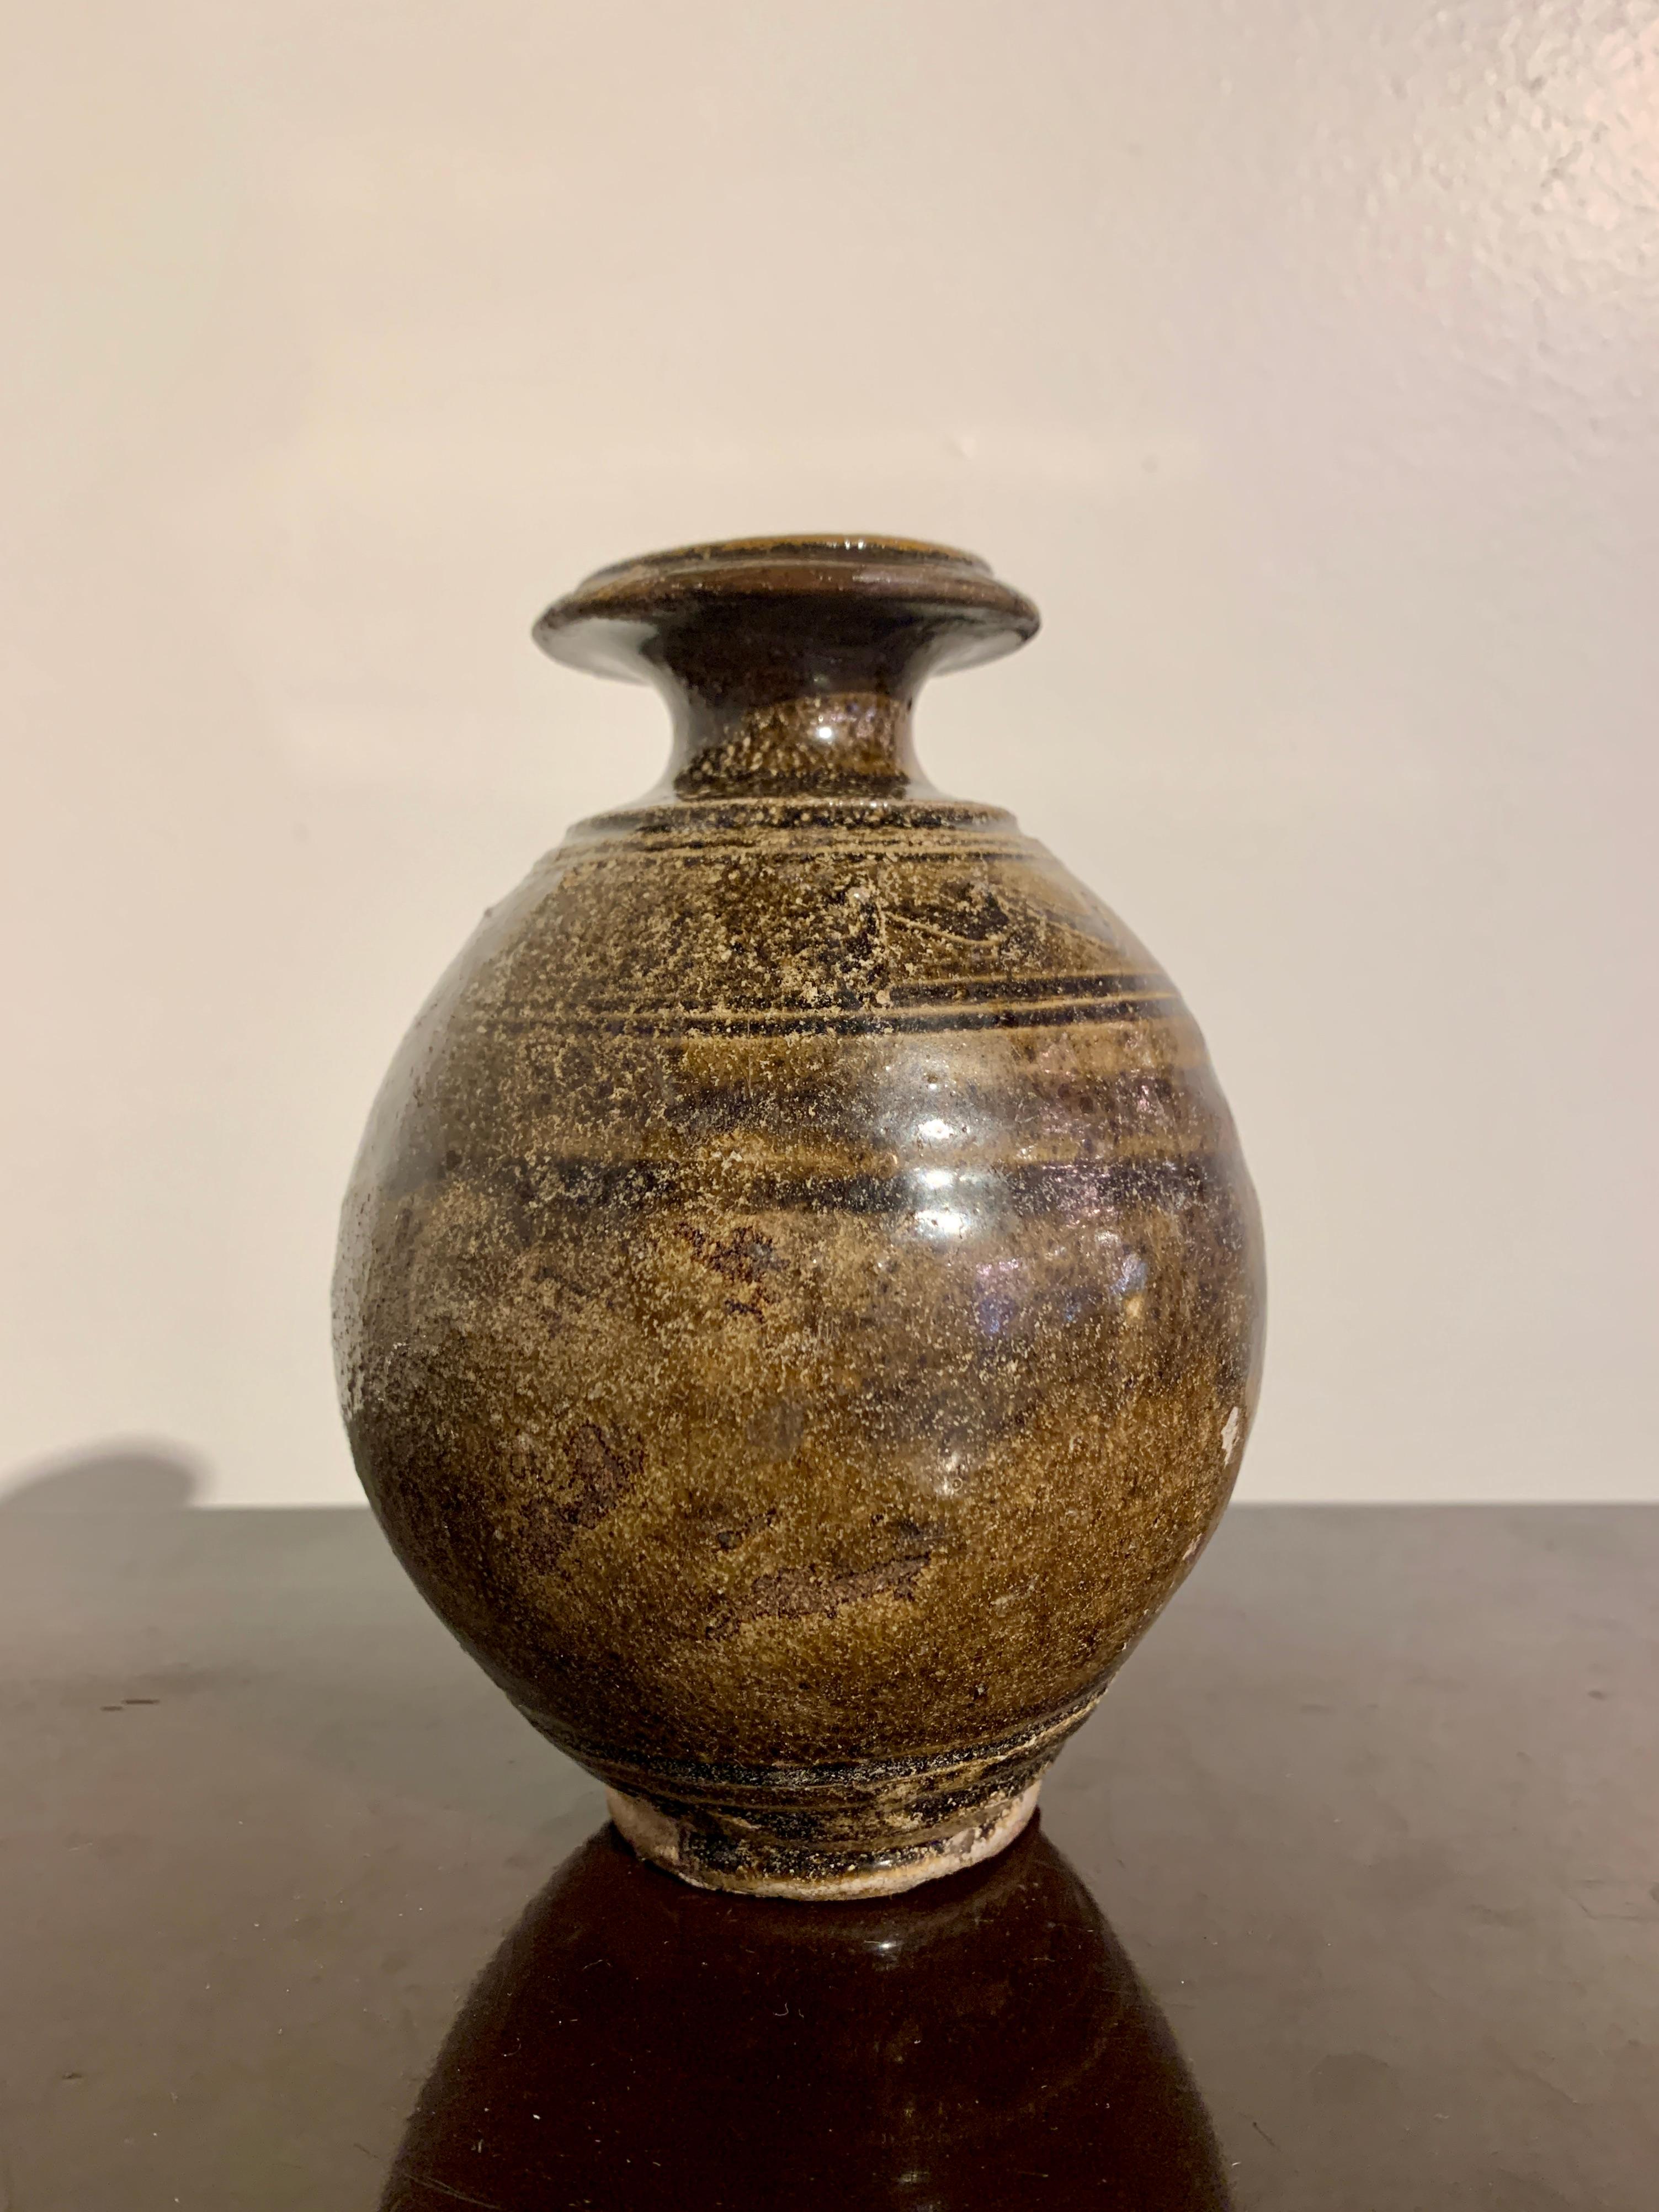 A lovely Thai Sawankhalok small bottle vase with olive and brown glaze, 14th to 16th century, Ayutthaya Period, Thailand.

The stoneware vase of globular form, set on a short foot with a narrow neck and flared mouth. The shoulders decorated with